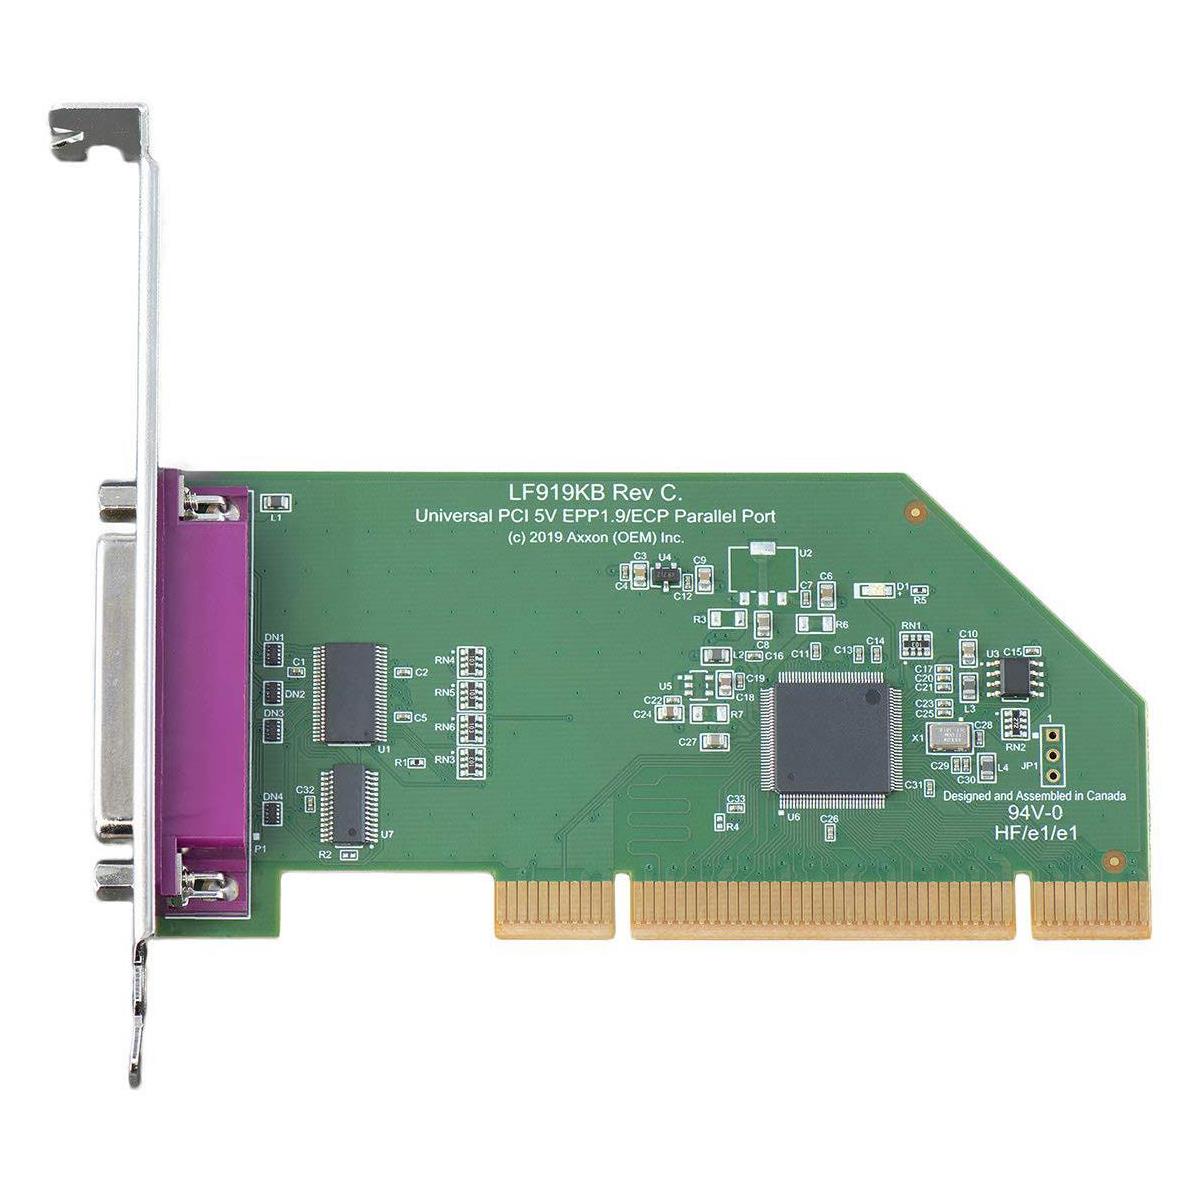 Image of Axxon Rev C PCI Express (PCIe) EPP 1.9/ECP Parallel Port Adapter